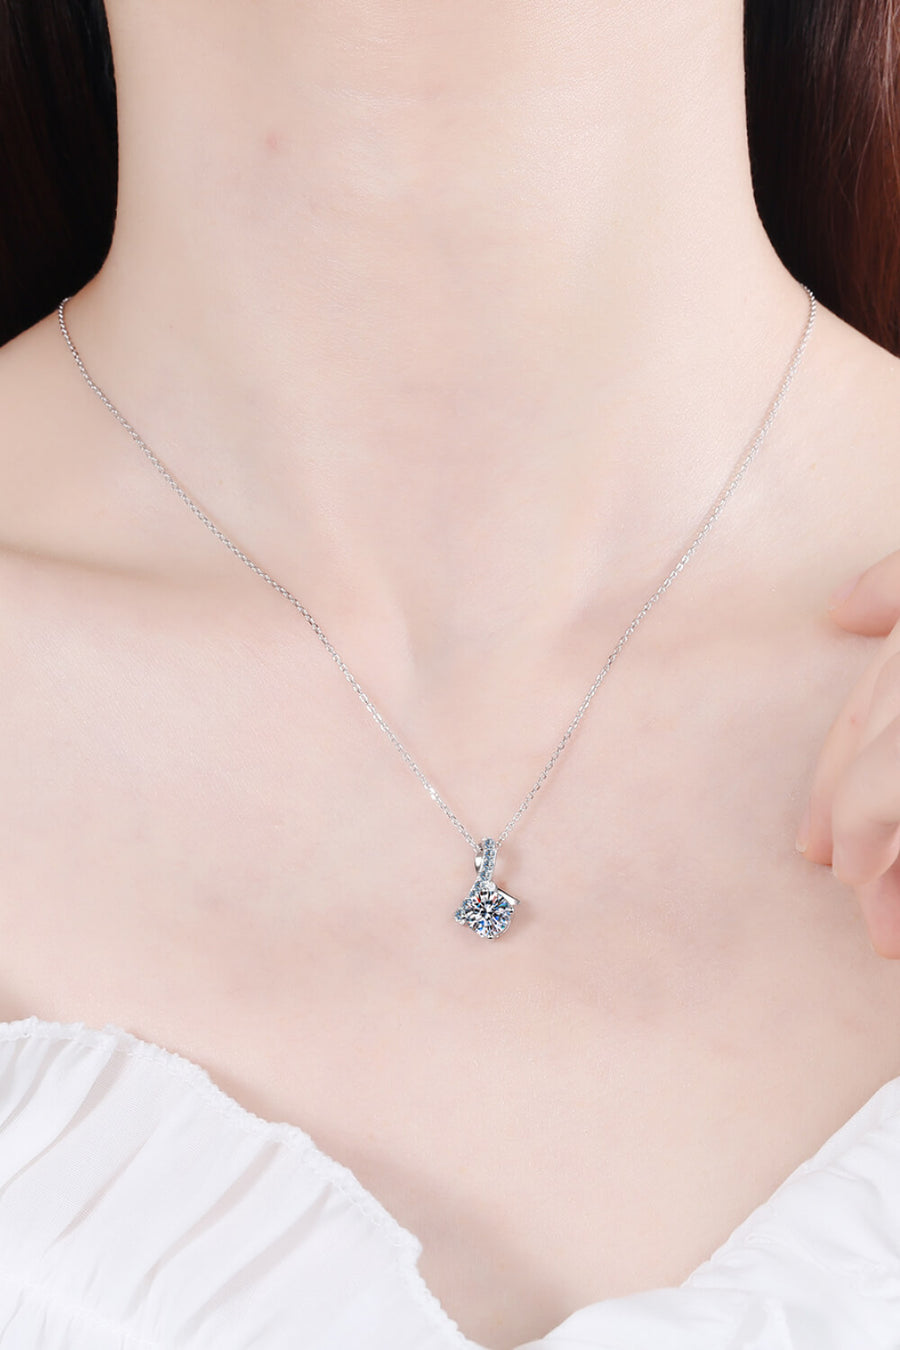 Best Diamond Necklace Jewelry Gifts for Women | 1 Carat Diamond Pendant Necklace - Unique and Chic | MASON New York